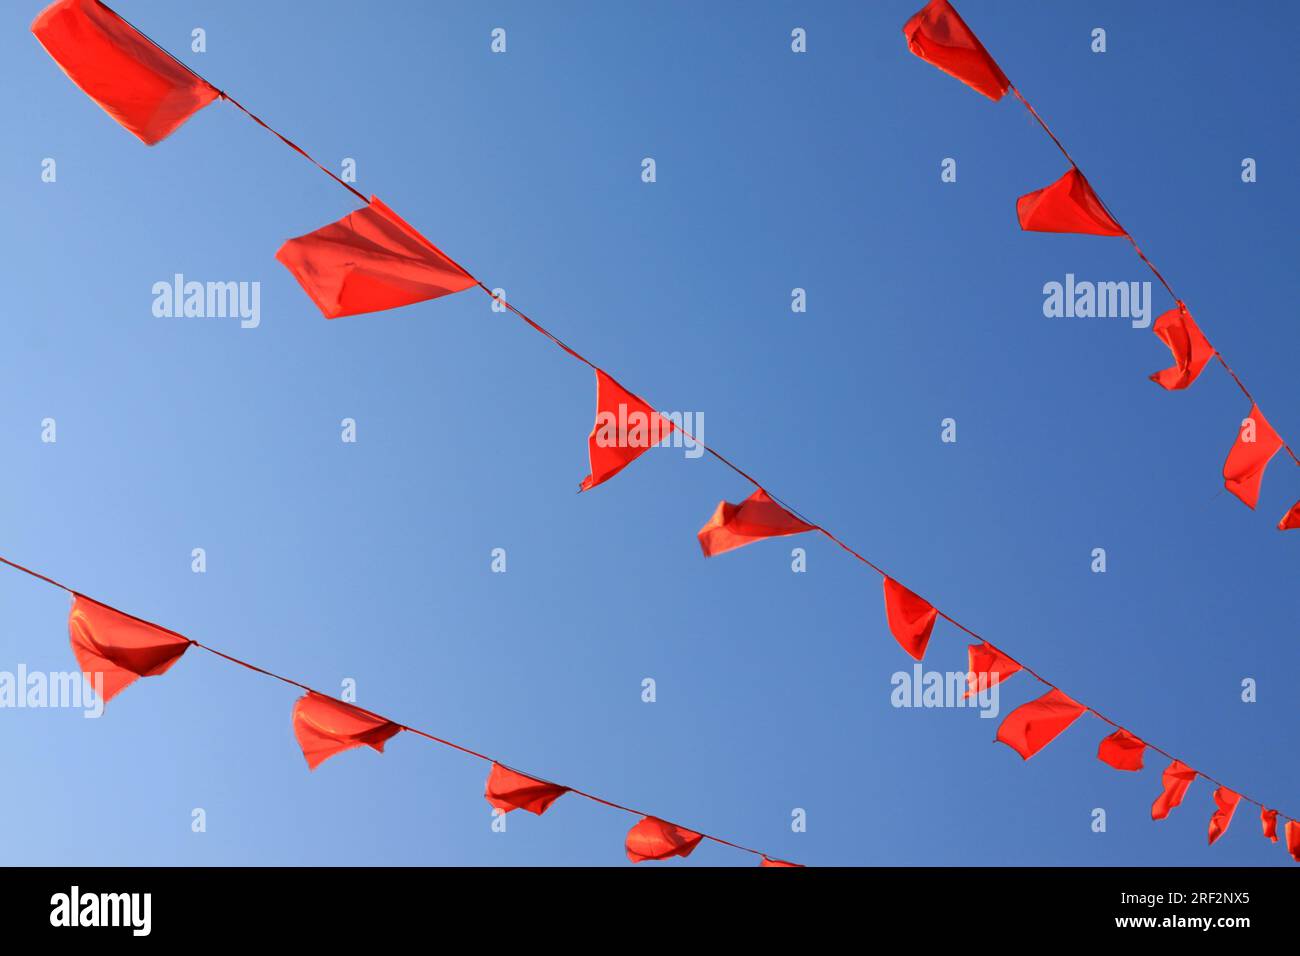 red ribbons flying in the blue sky Stock Photo